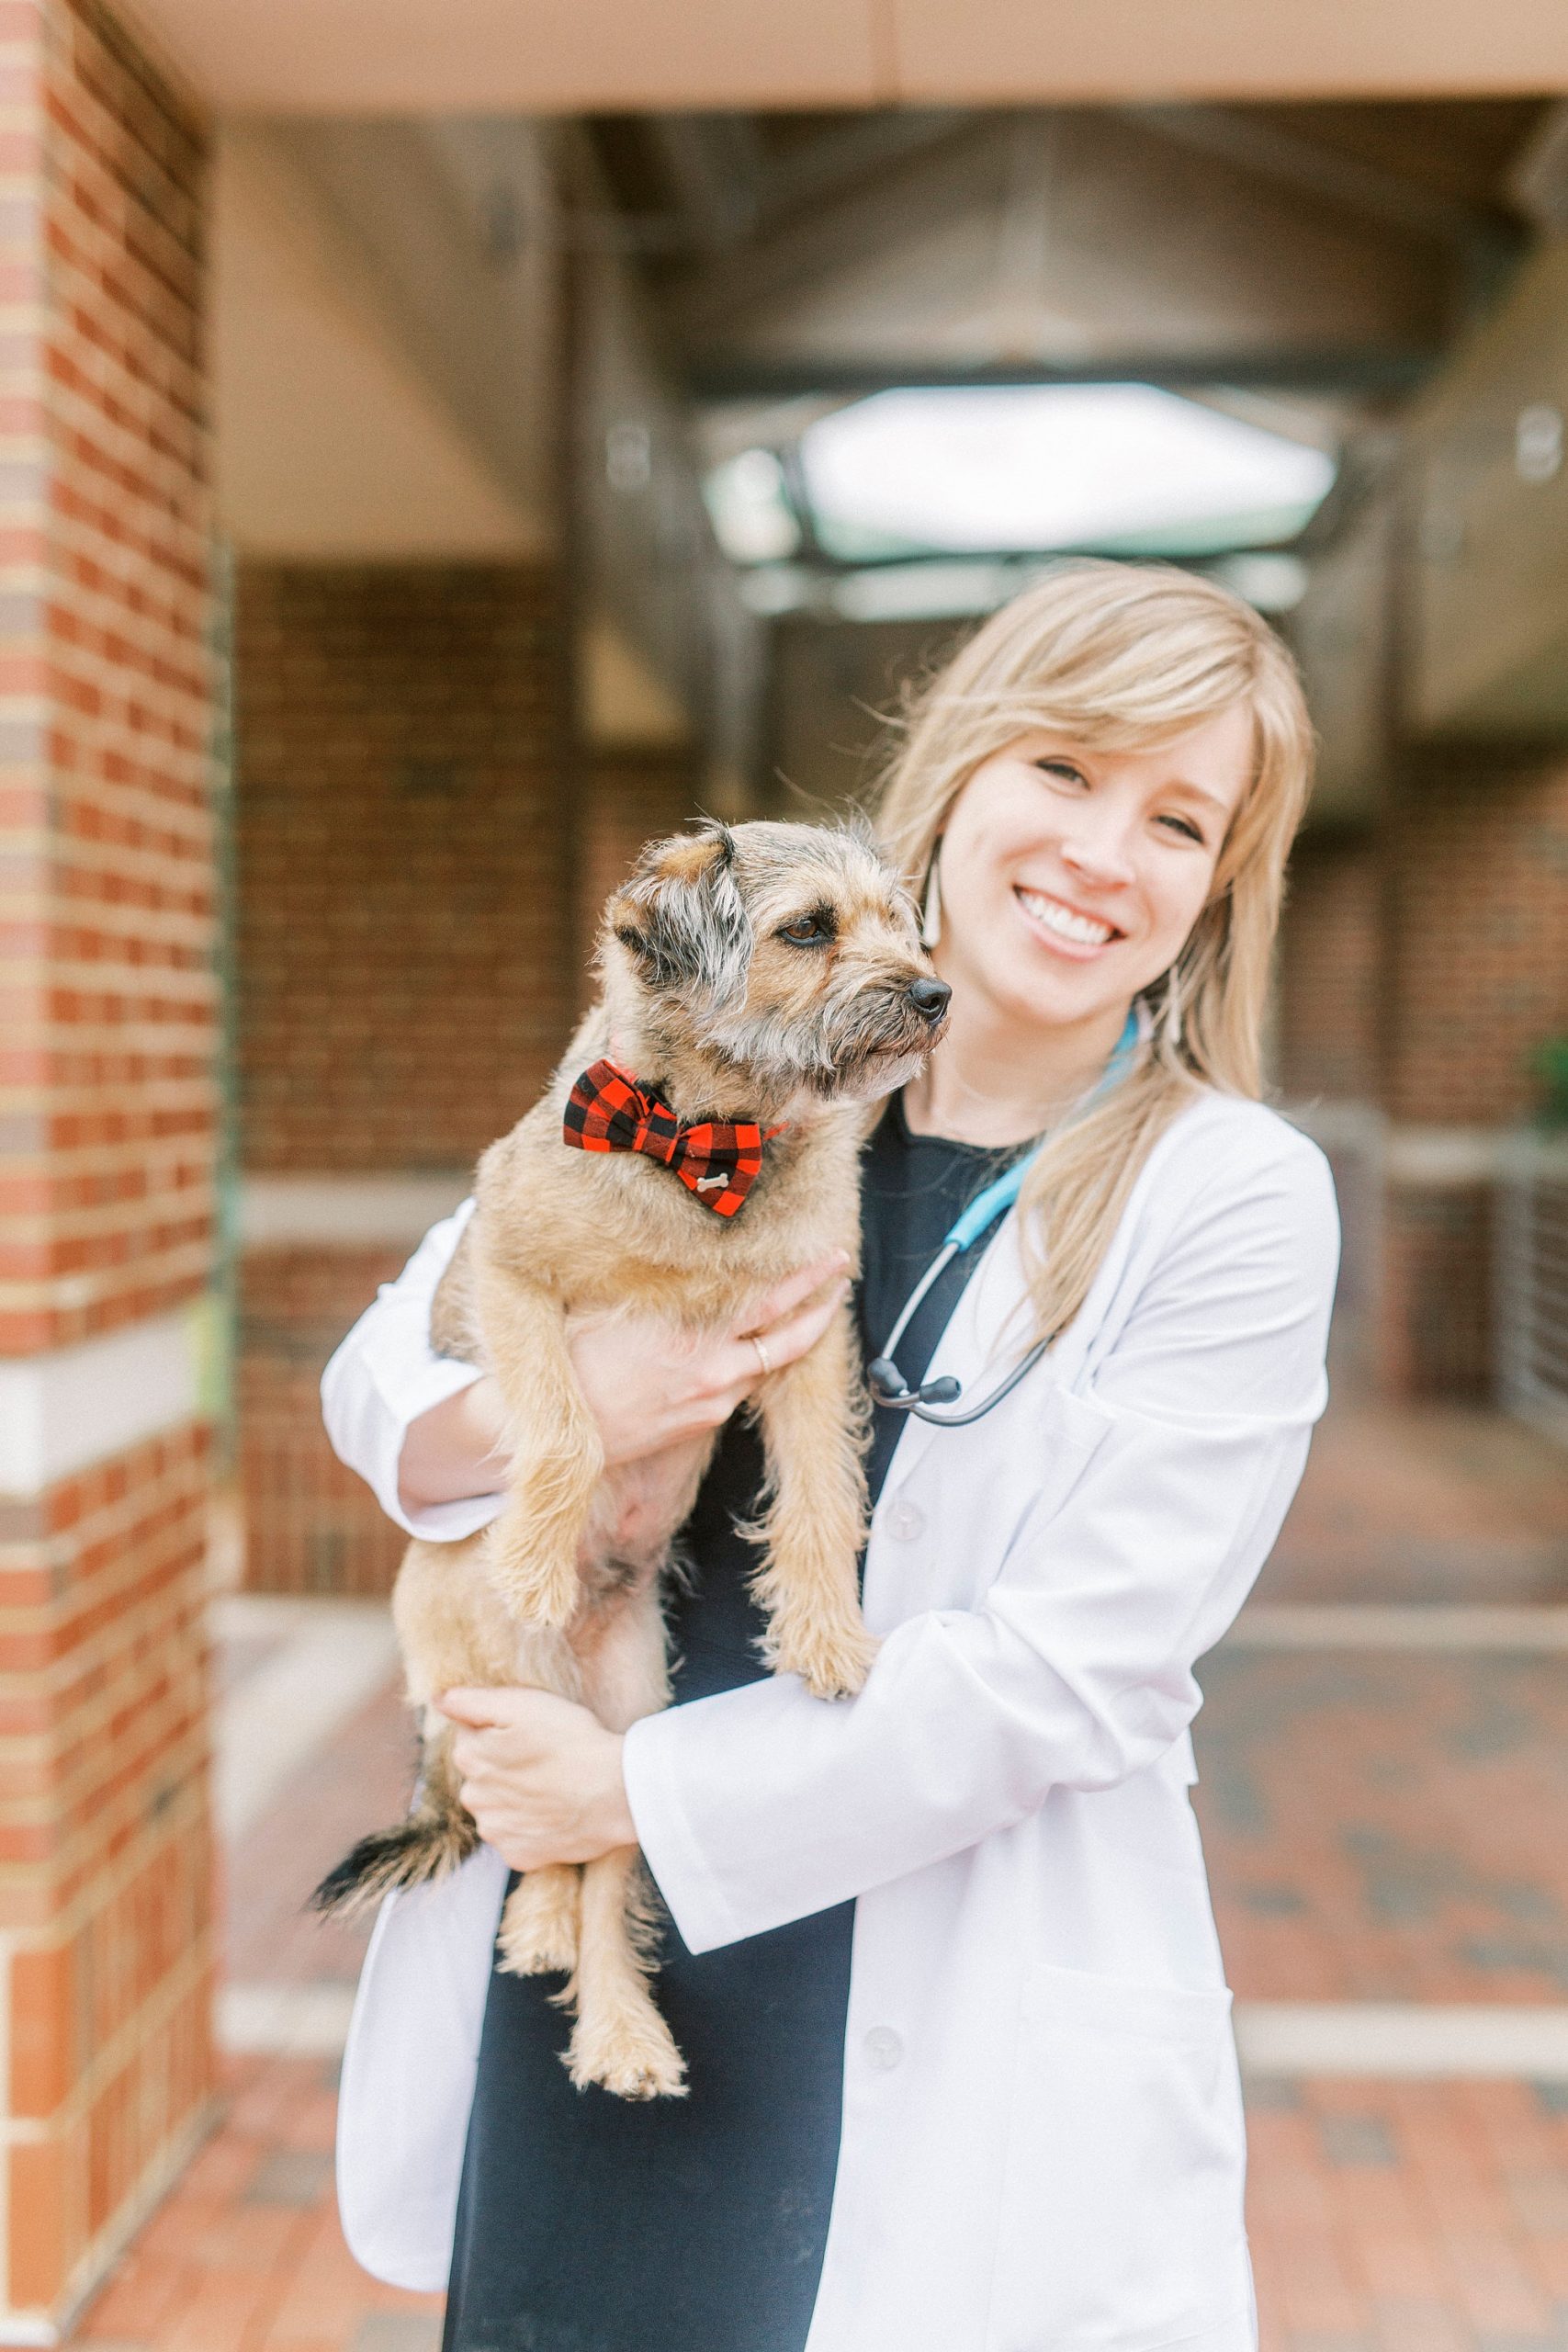 veterinary school graduate poses with dog in bowtie